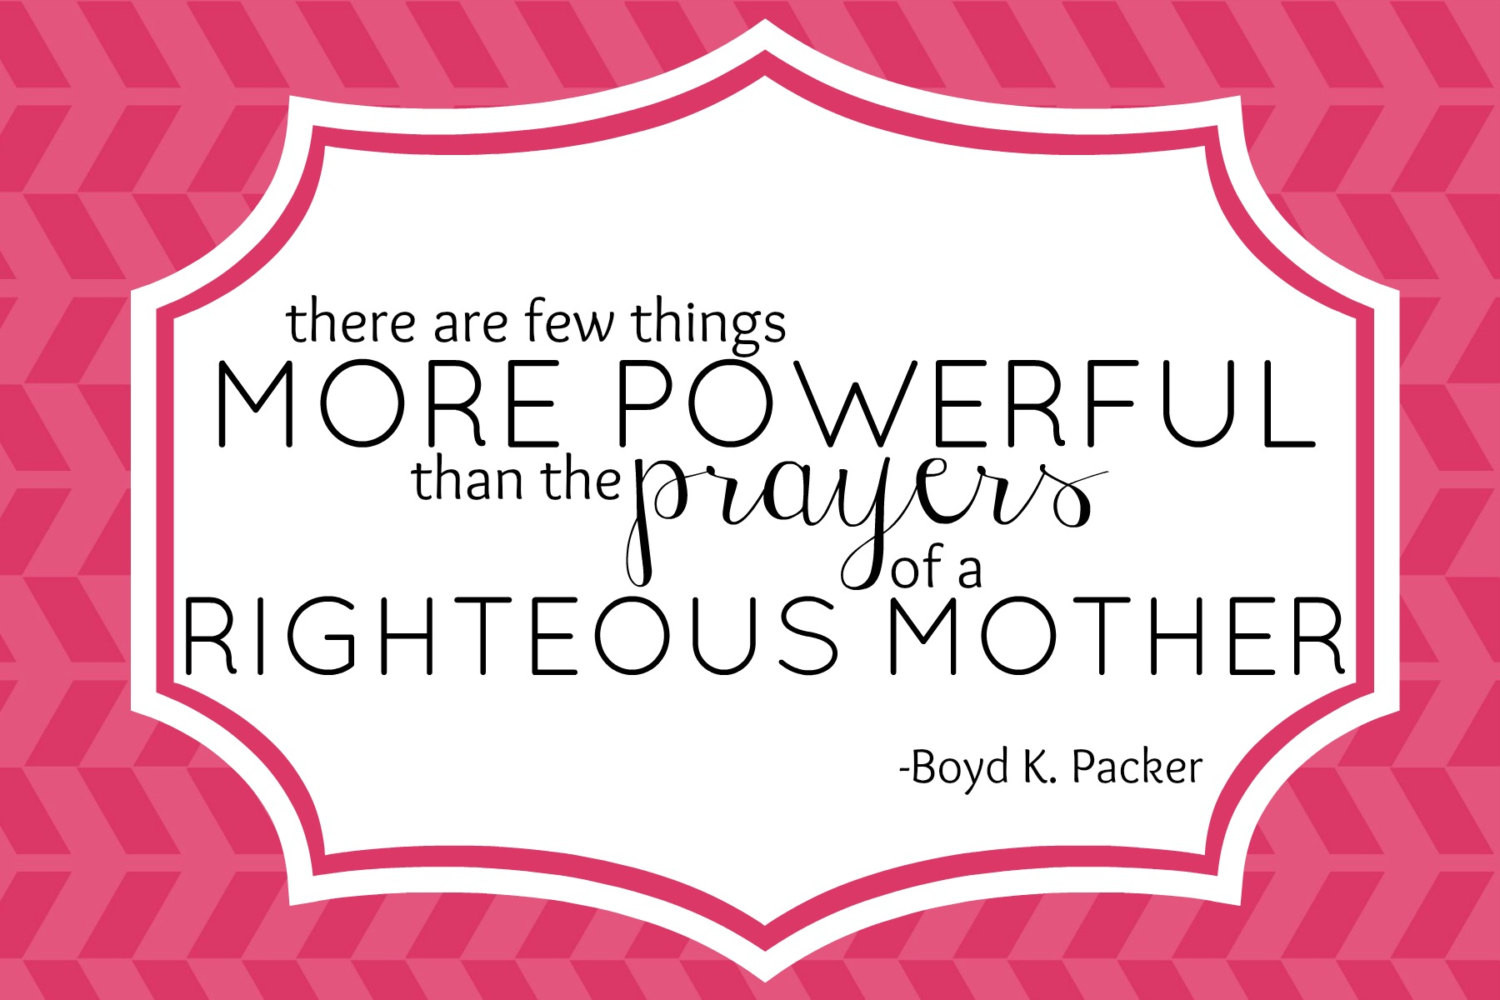 Lds Quotes About Mothers
 Lds Mothers Day Quotes QuotesGram